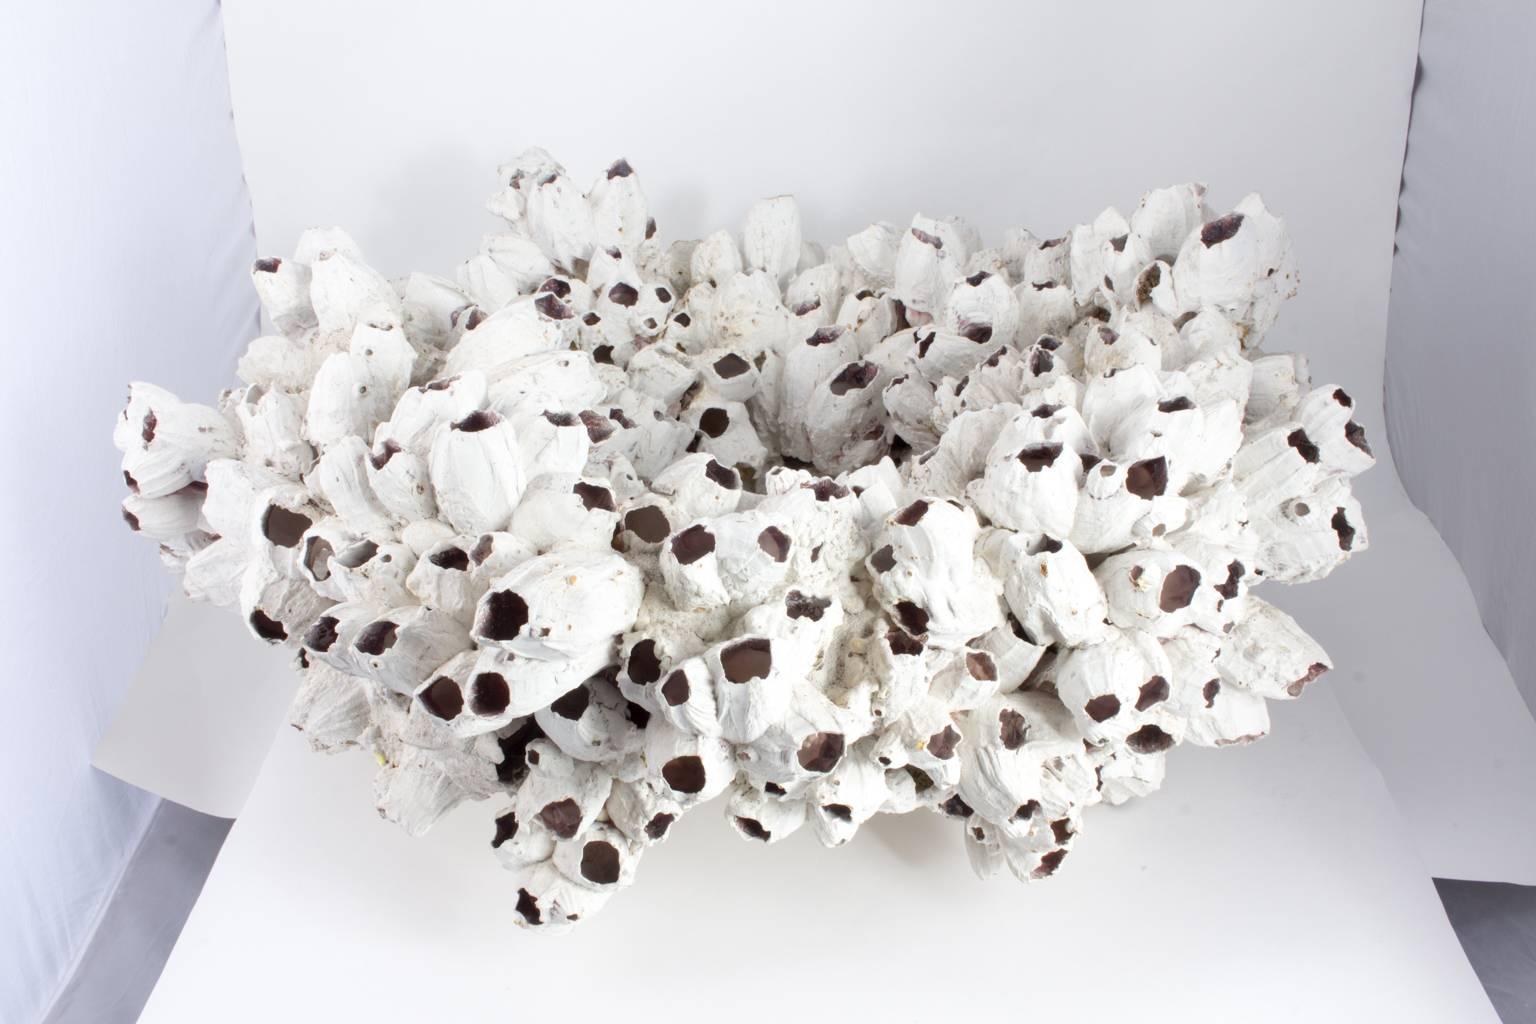 Handcrafted by a Texas artist, this large-scale sculpture incorporates barnacles to create a bowl centerpiece.